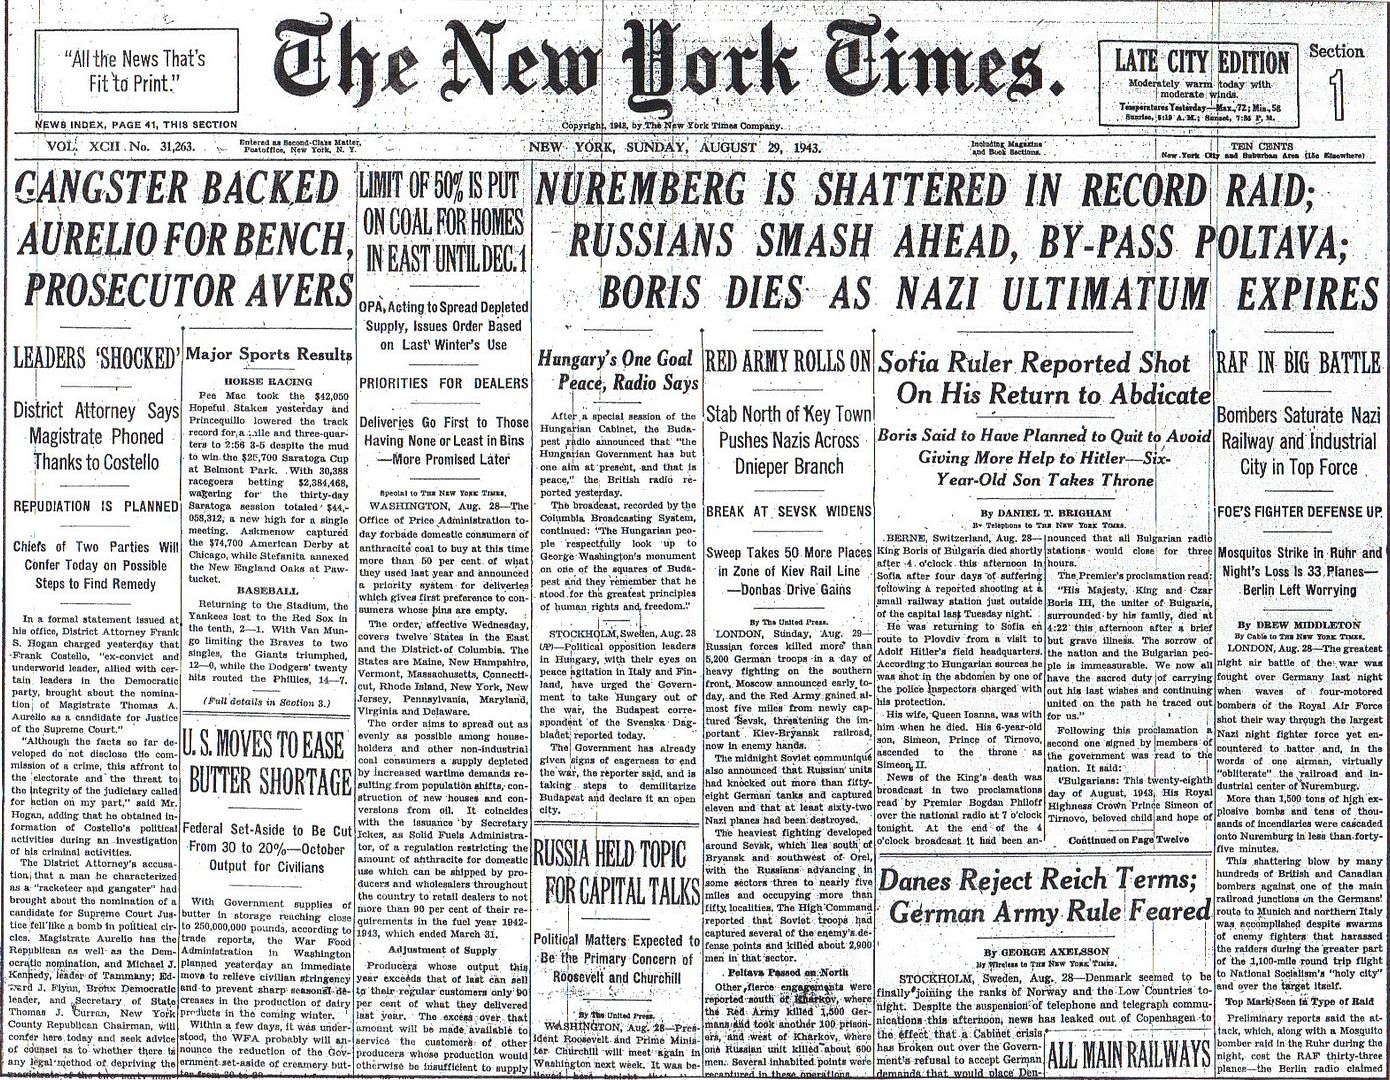 NUREMBERG IS SHATTERED IN RECORD RAID; RUSSIANS SMASH AHEAD, BY-PASS ...